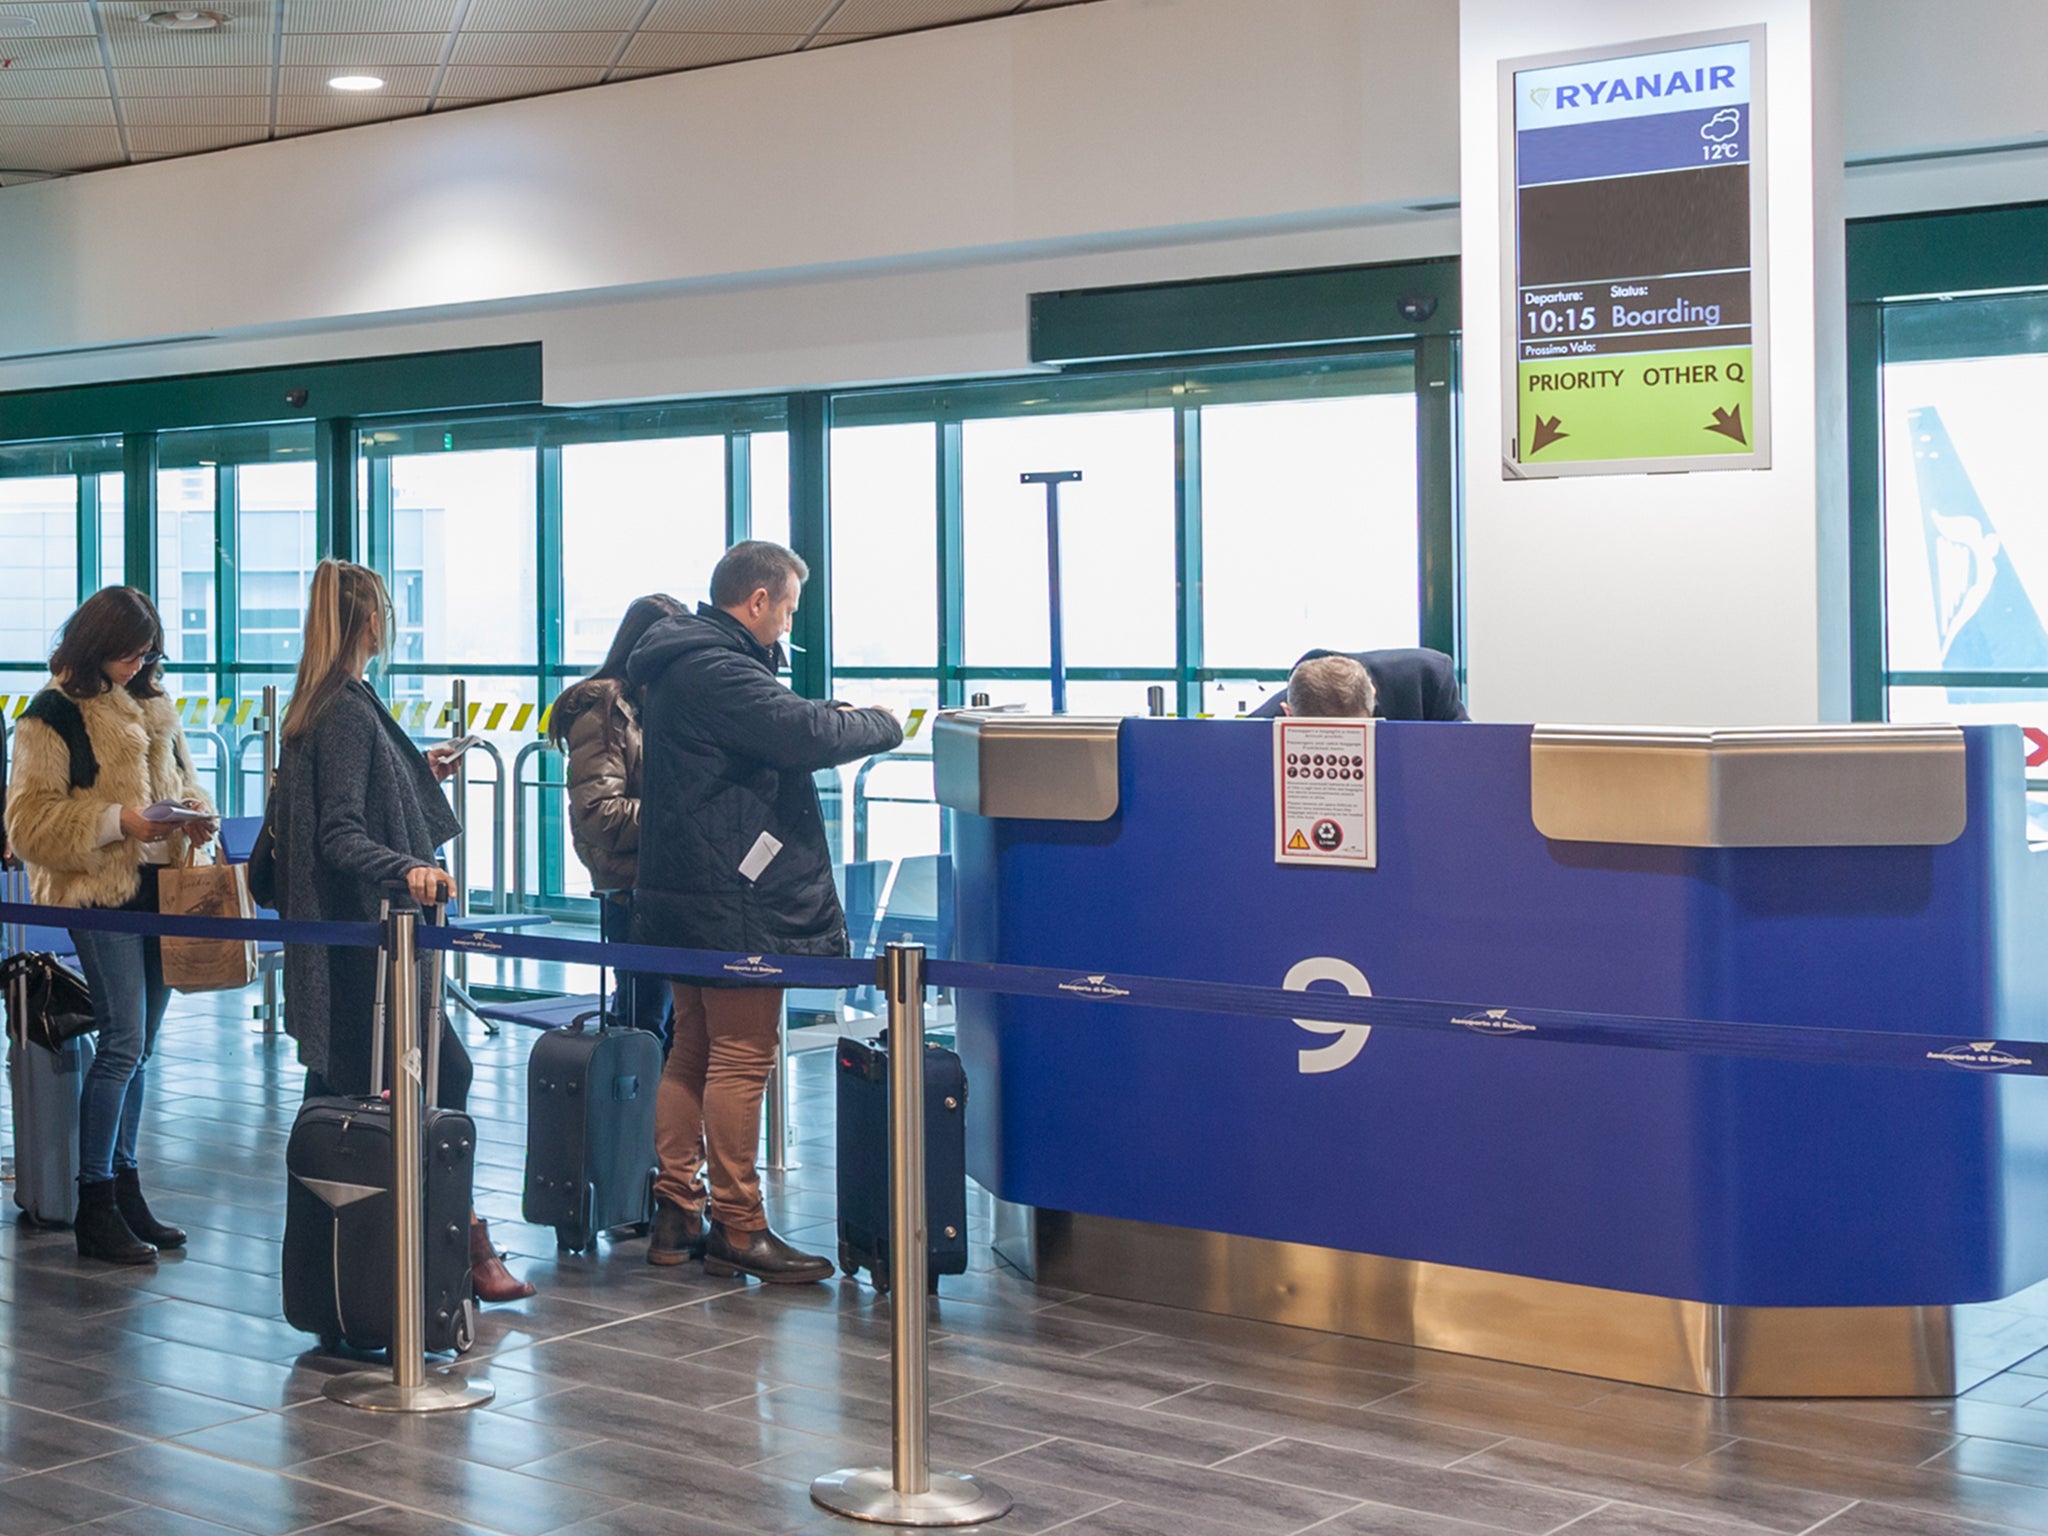 Passengers at a Ryanair check-in counter